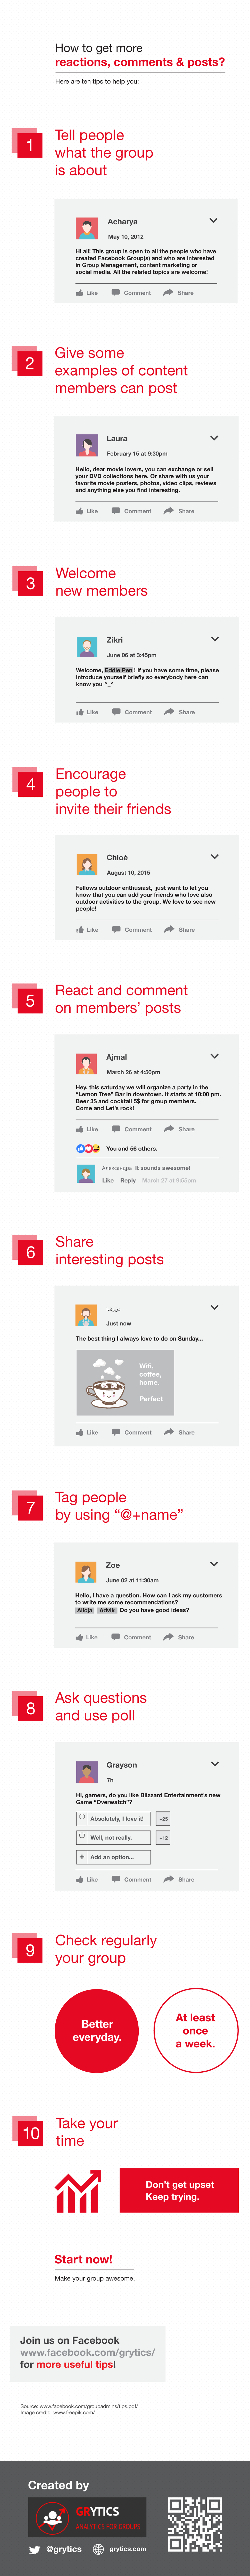 10 Tips to Optimize Your Facebook Groups - #infographic